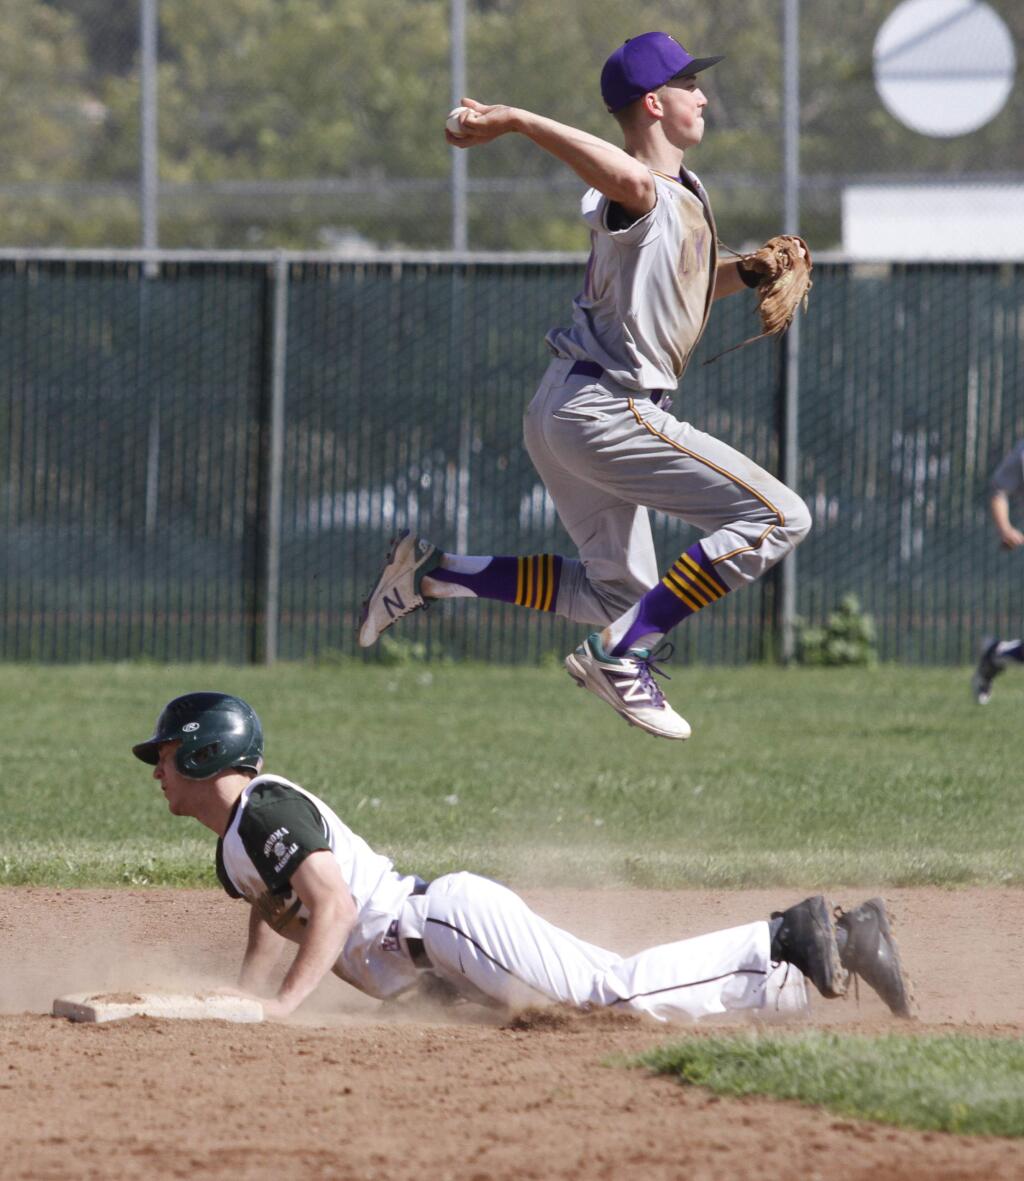 Bill Hoban/Index-TribuneSonoma's Carson Snyder slides into second during Saturday's game against Ukiah. Snyder was forced at second, but he did single in the winning runs.